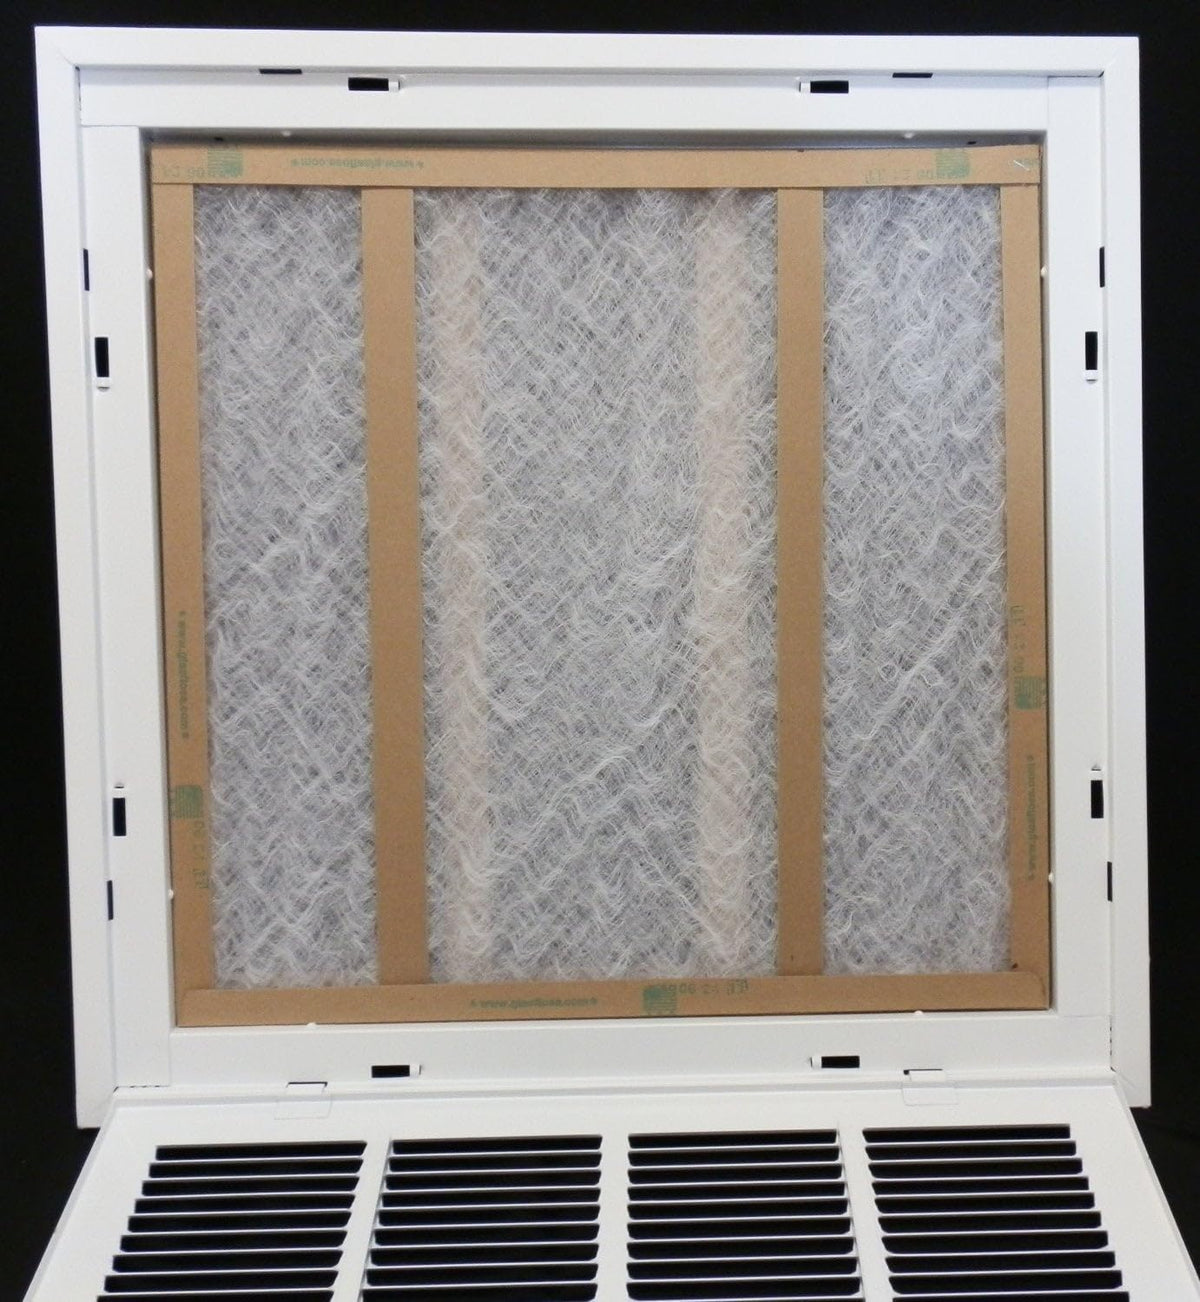 22&quot; X 34&quot; Steel Return Air Filter Grille for 1&quot; Filter - Removable Frame - [Outer Dimensions: 24 5/8&quot; X 36 5/8&quot;]